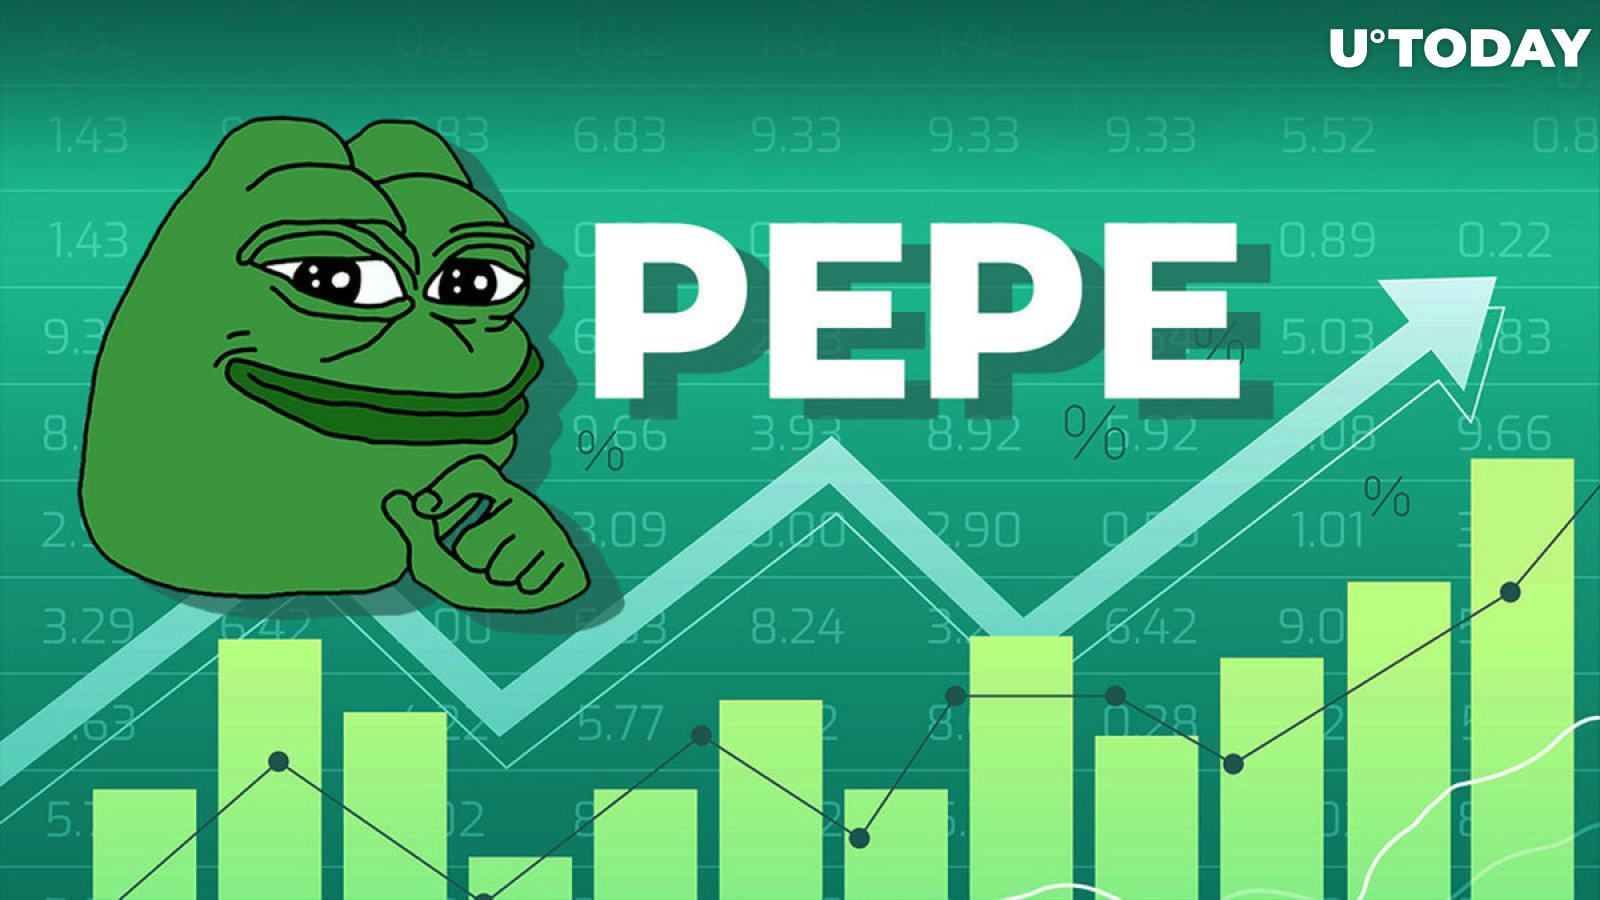 PEPE Copycat Jumps 34%, Here's What Distinguishes This Meme Coin